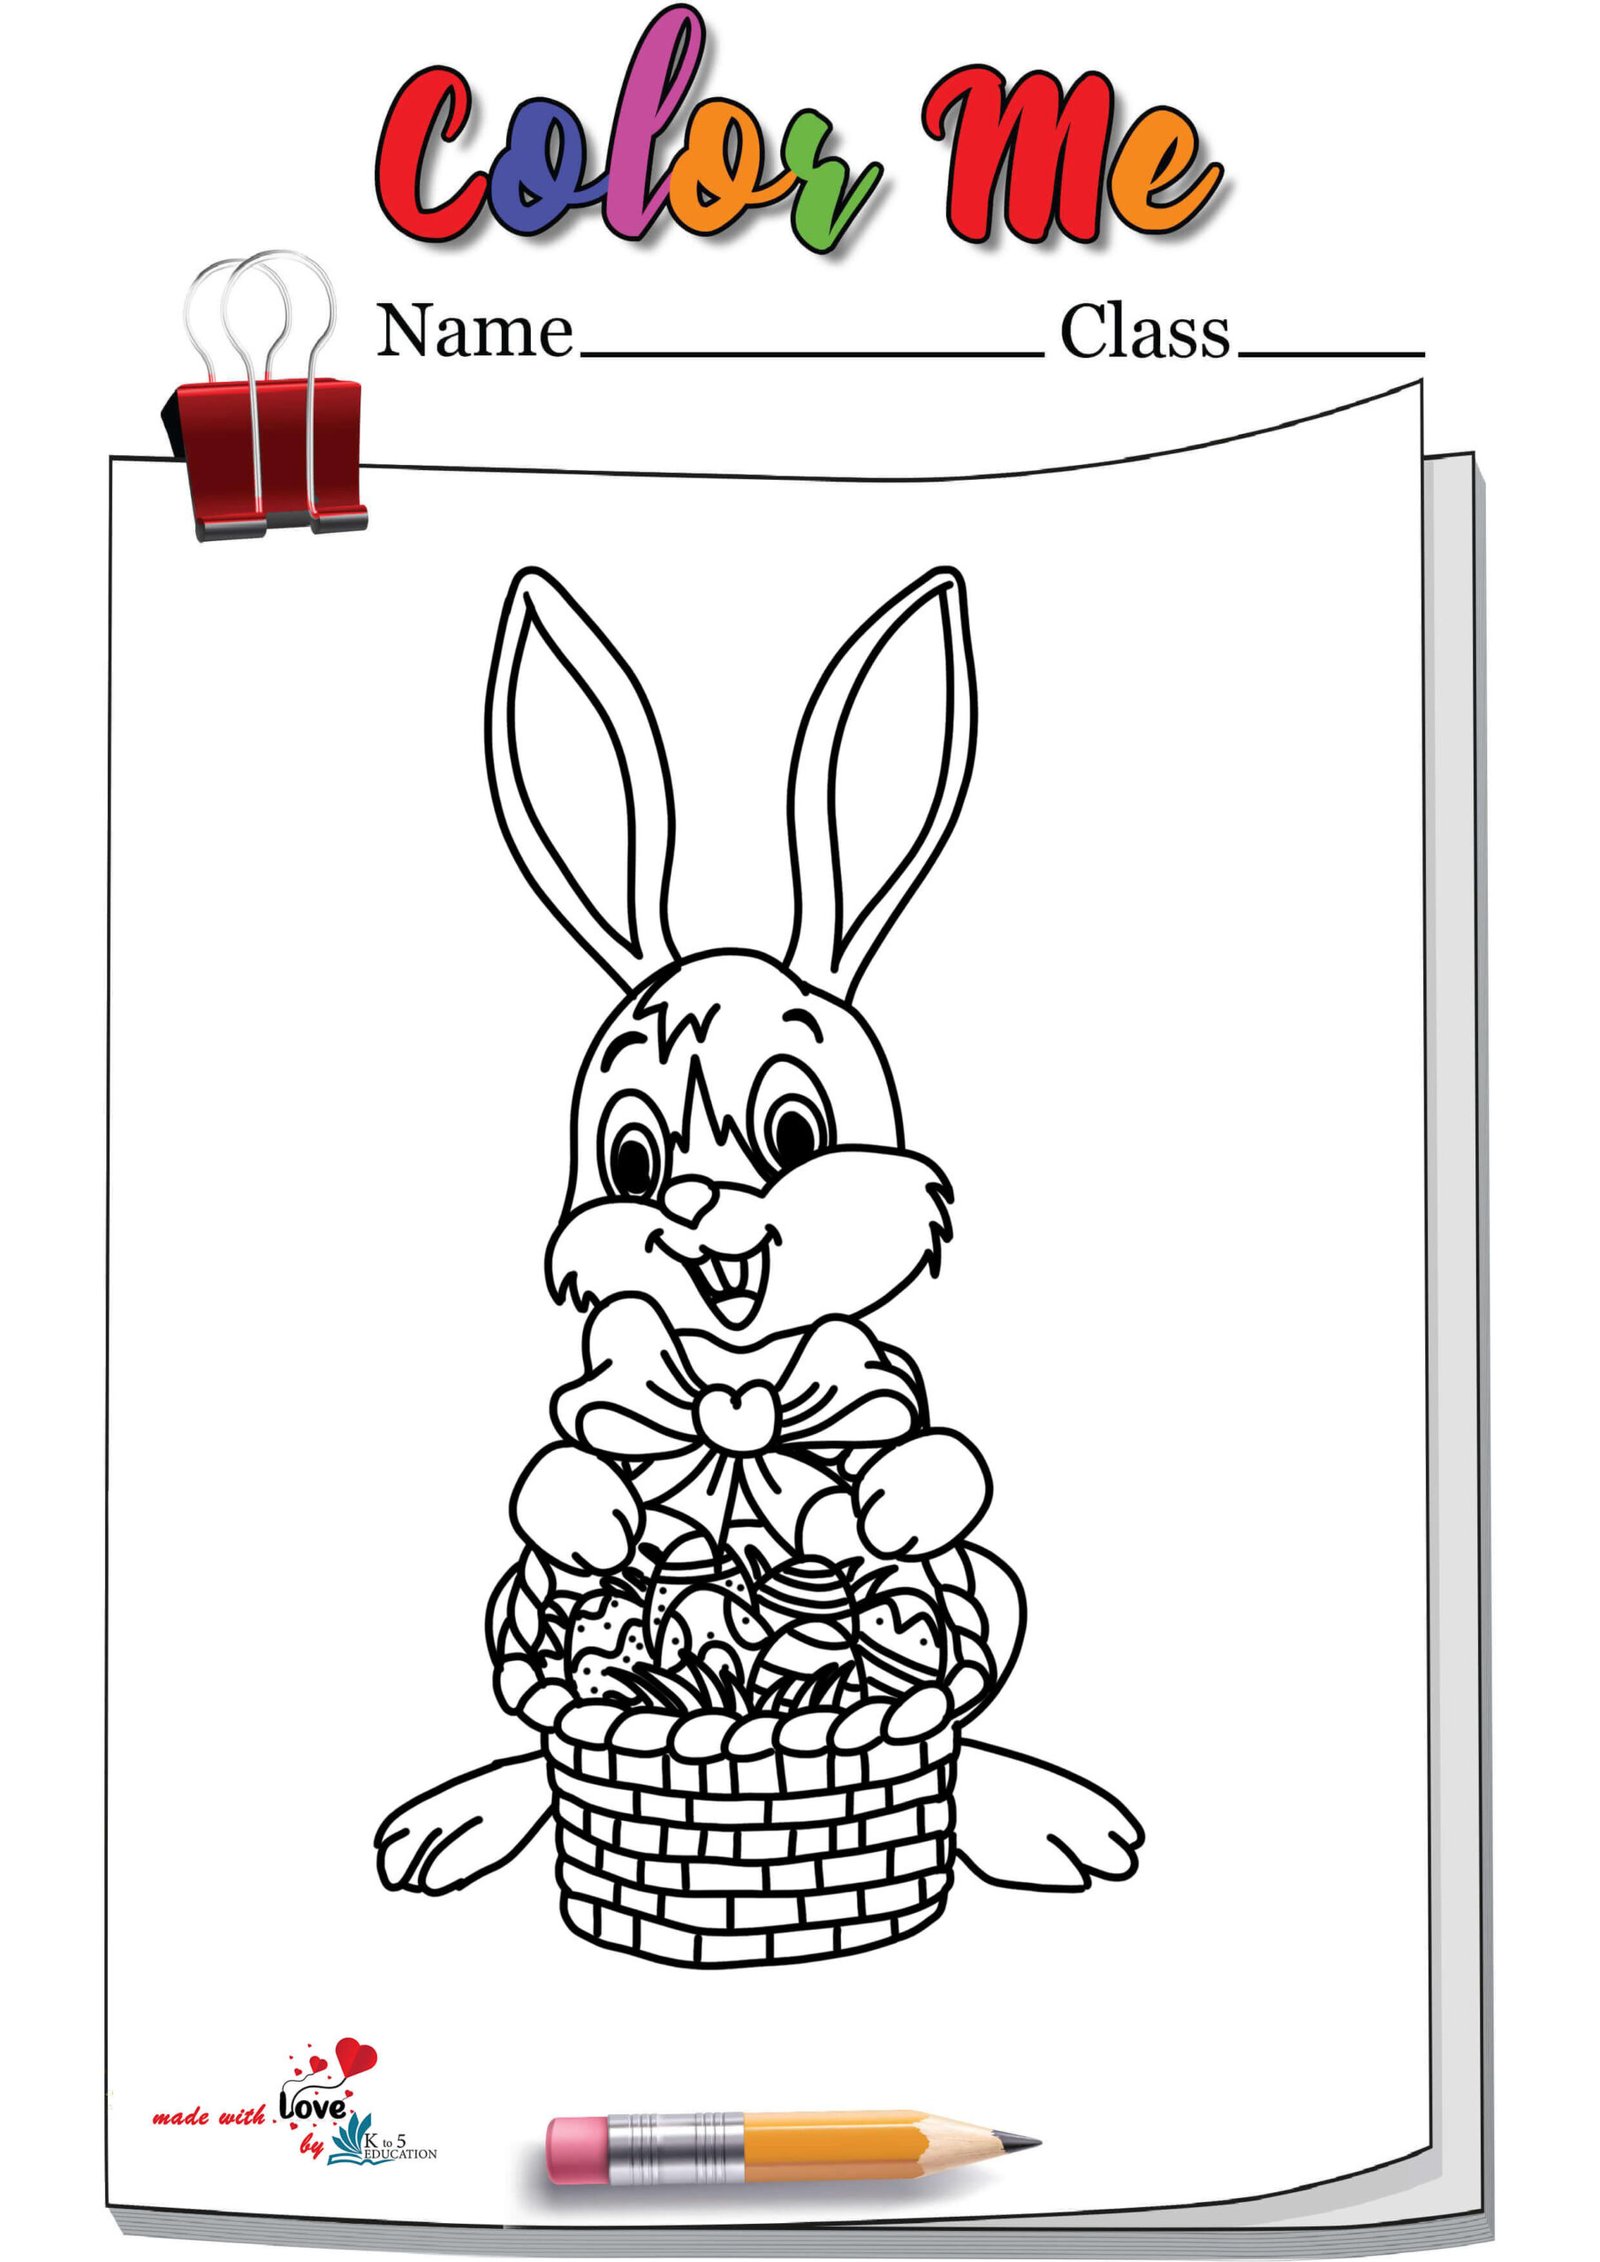 A Easter Bunny With Basket Of Painted Easter Eggs Coloring Page